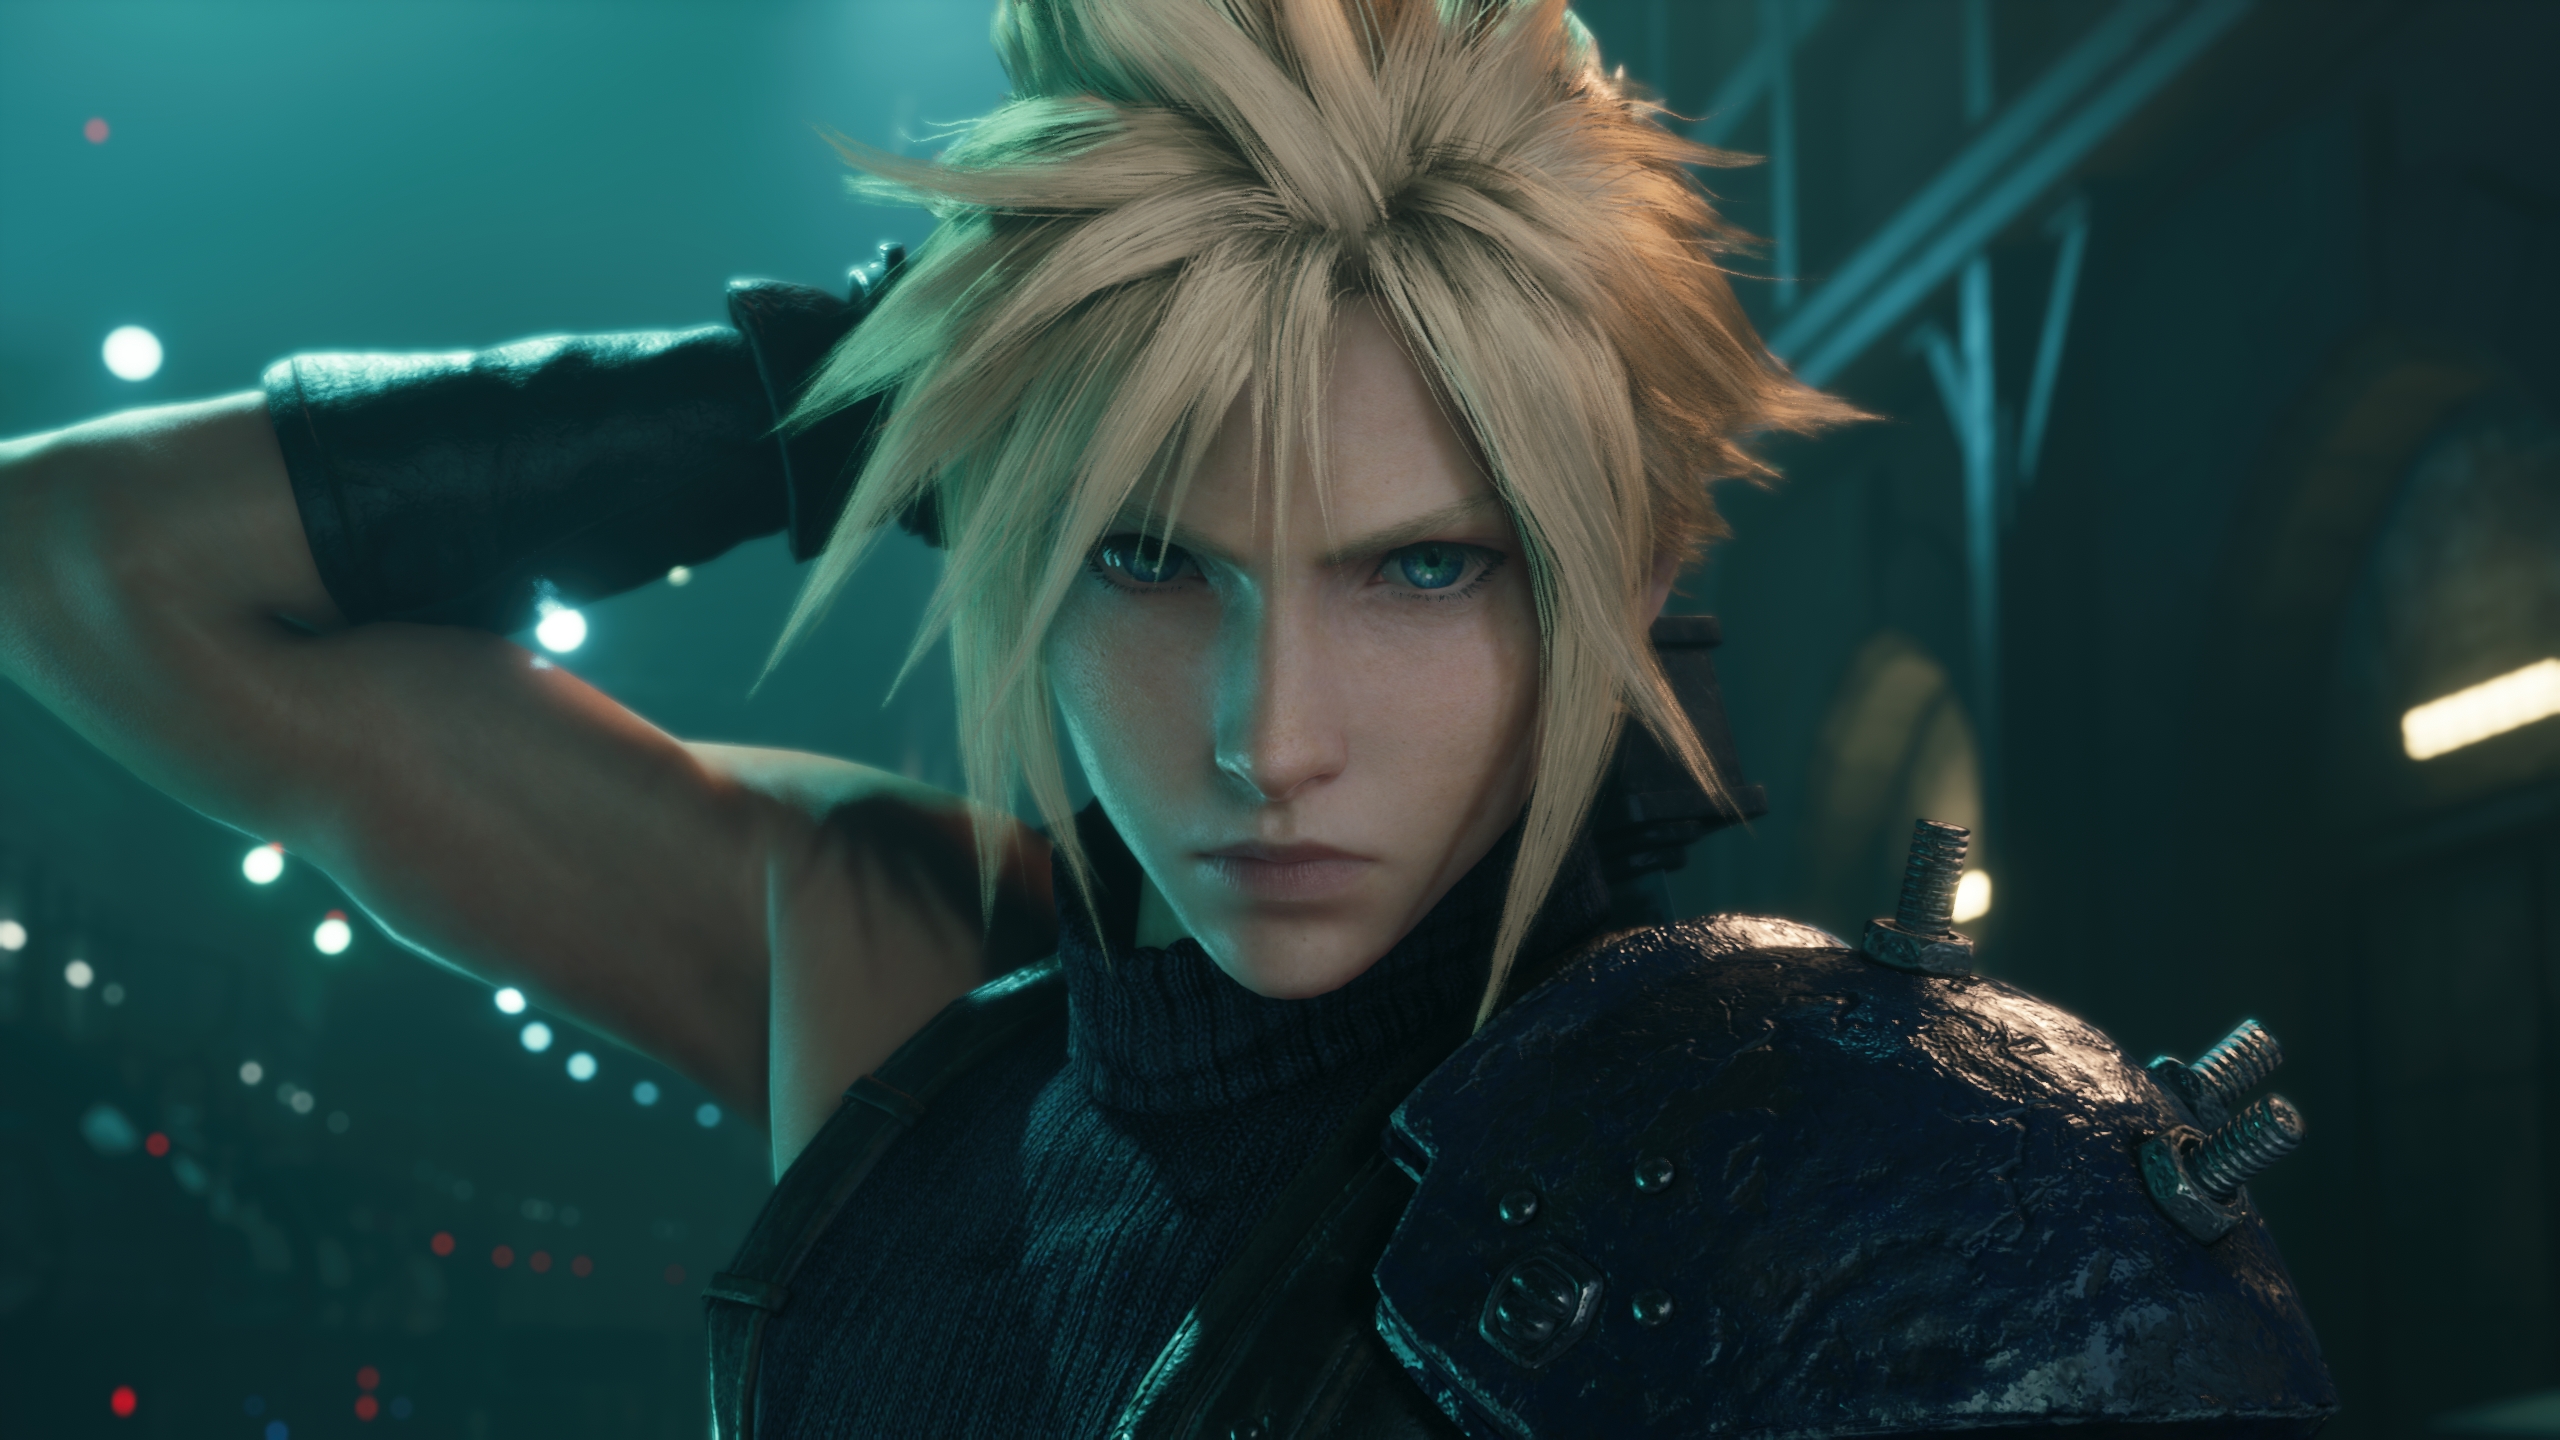  Nvidia driver update could help fix stuttering in Final Fantasy 7 Remake 